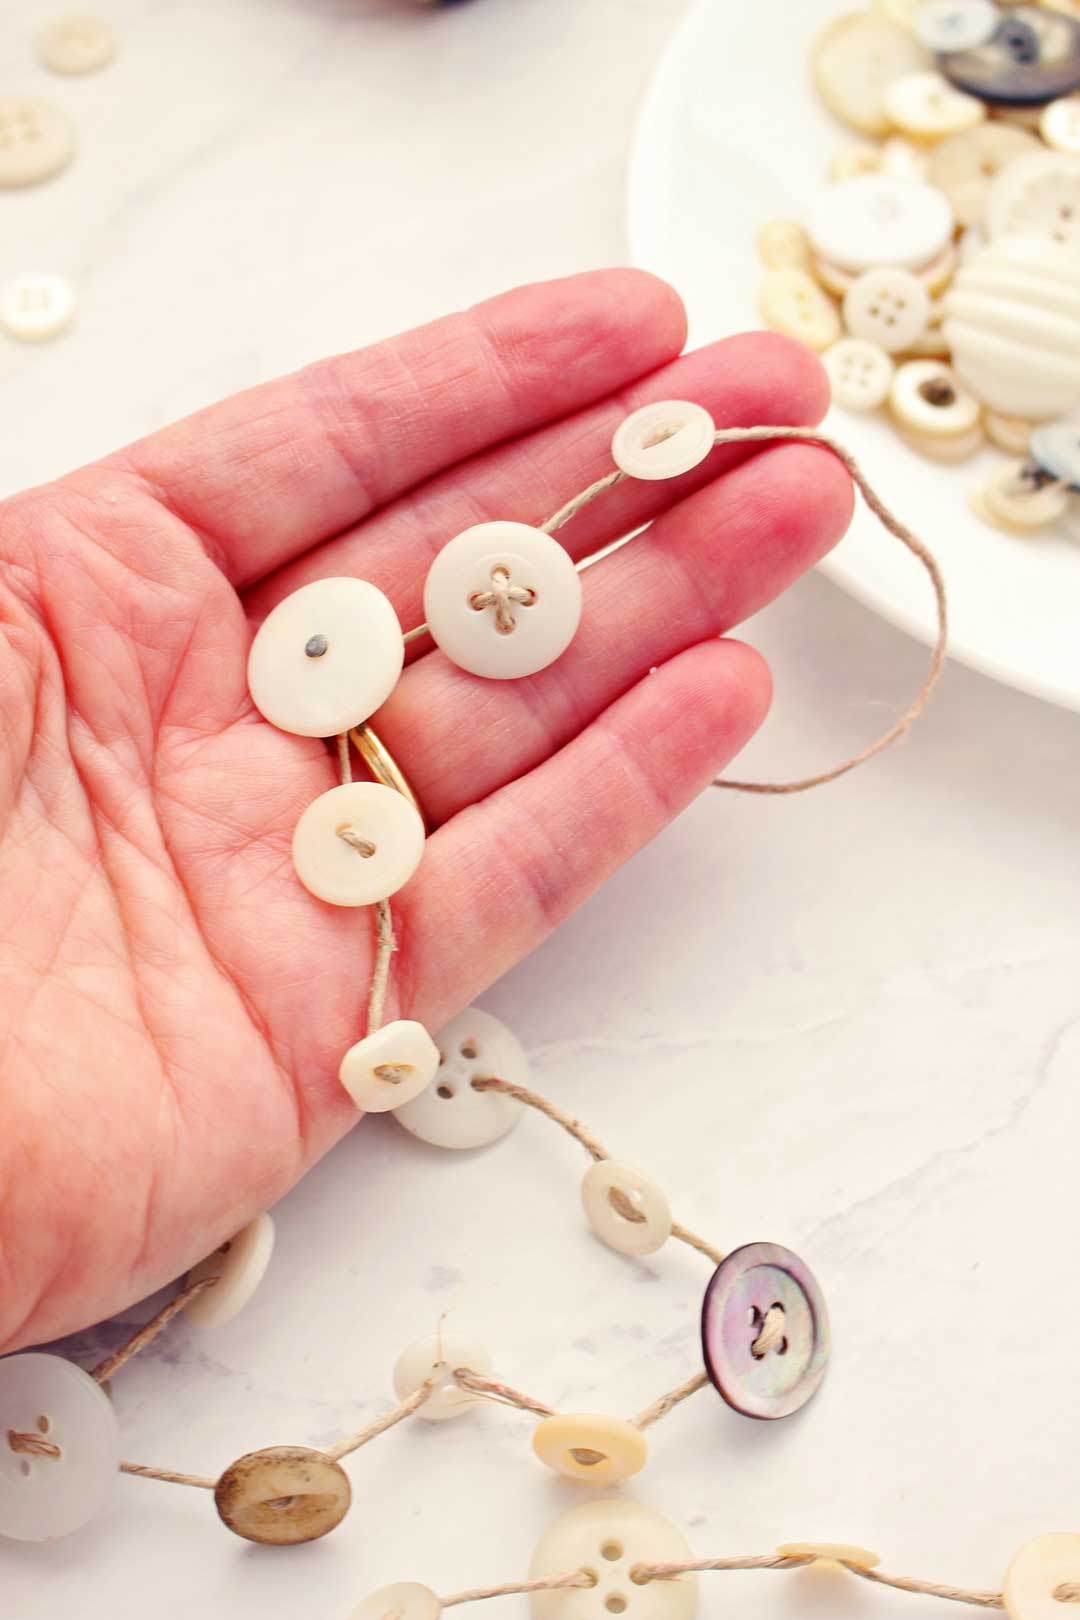 Open hand holding string of twine and off white colored buttons with plate of buttons in the background.